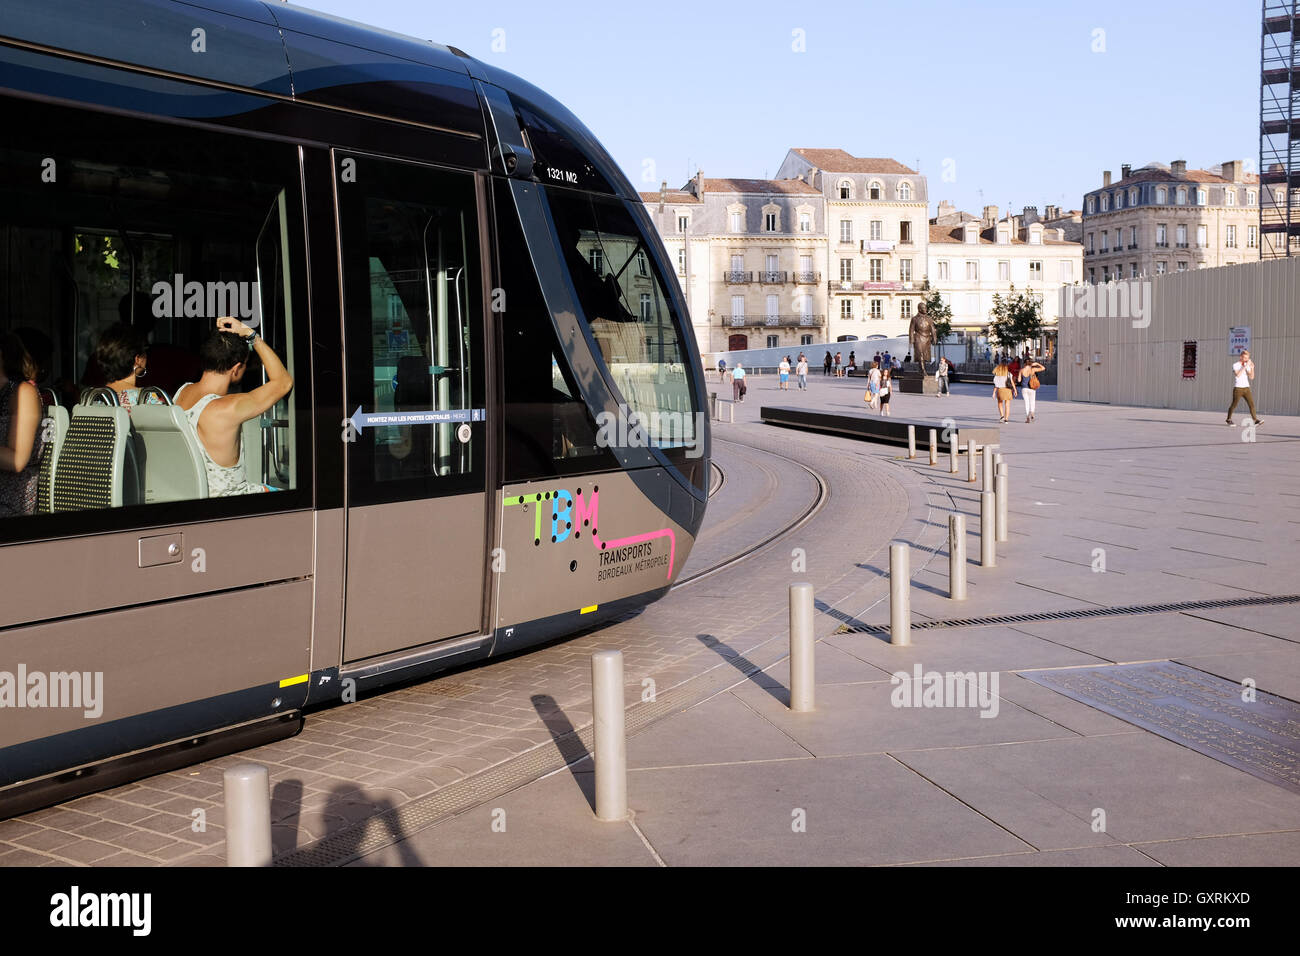 Tram system in Bordeaux France Stock Photo